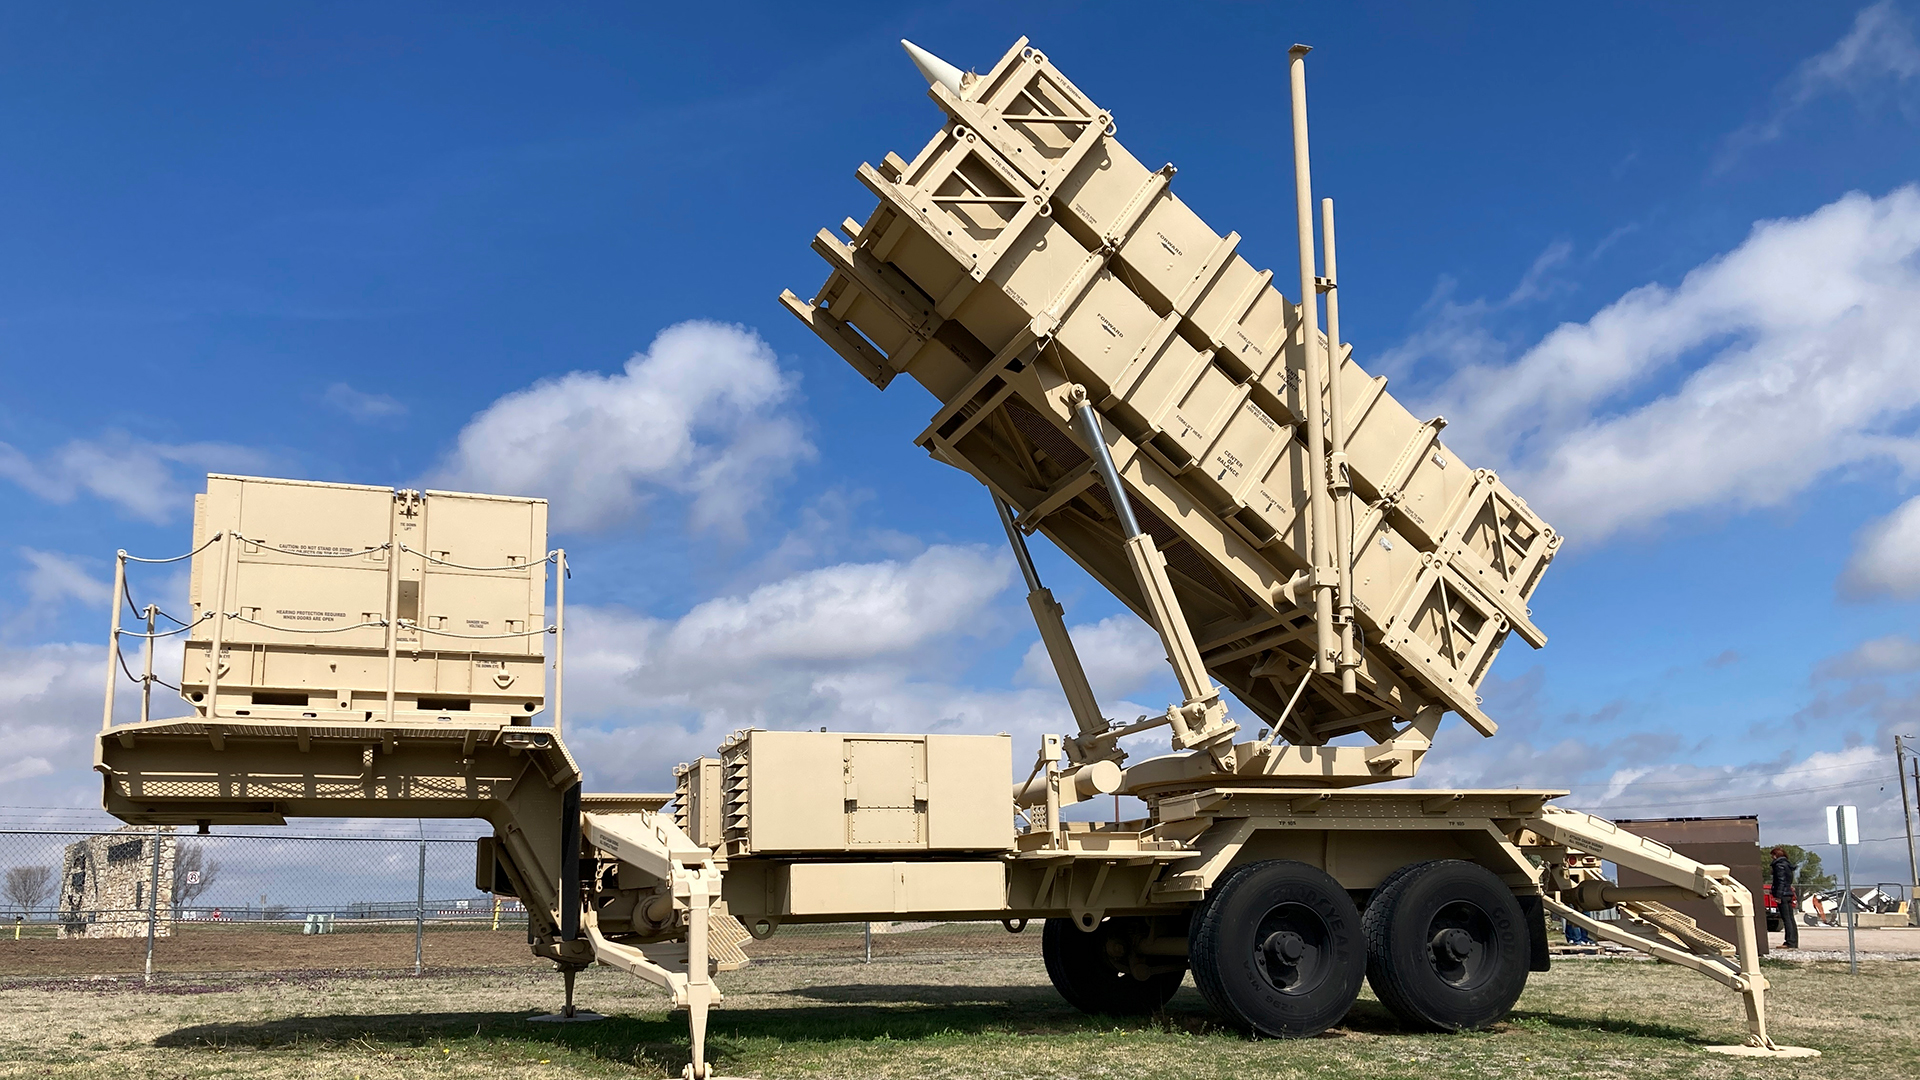 A Patriot missile mobile launcher is displayed outside the Fort Sill Army Post near Lawton, Oklahom...